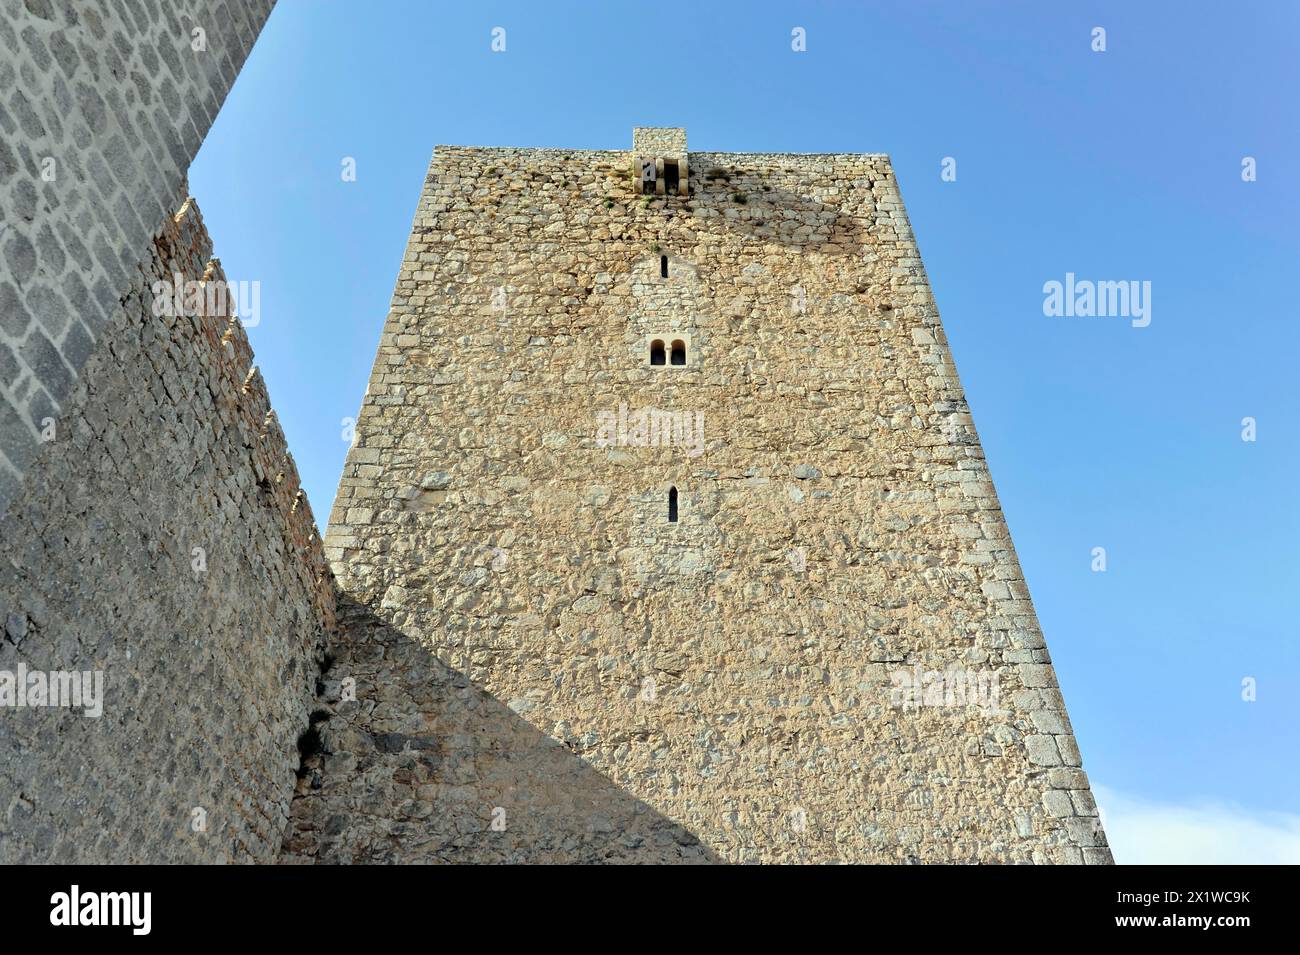 Jaen, Castillo de Santa Catalina on Jaen, View of an old stone defence defence tower in front of a clear sky, Jaen, Baeza, Ubeda, Andalusia, Spain Stock Photo